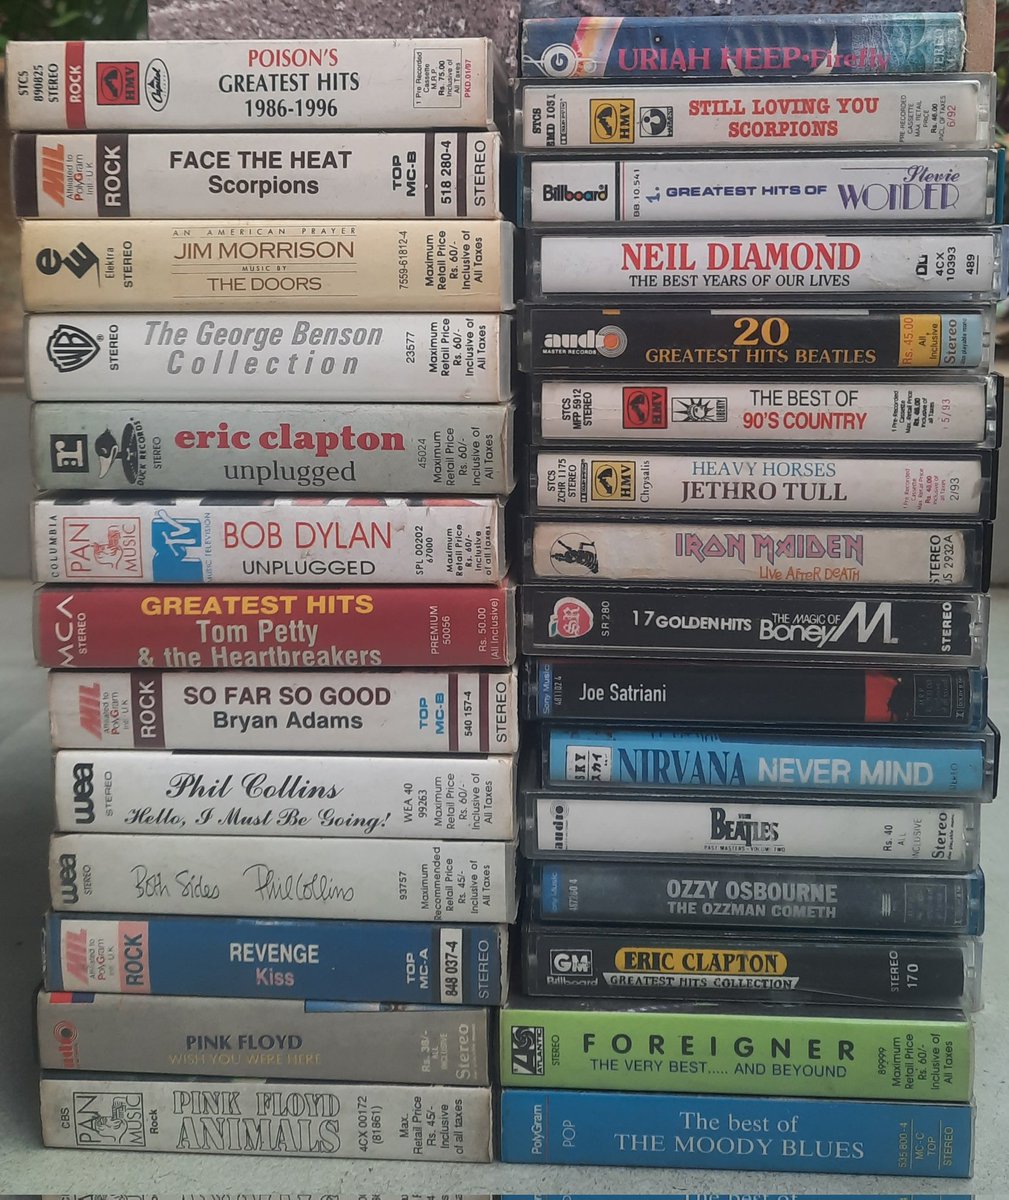 Few of my precious things...

#YesterdayOnceMore #Youth #Cassettes #Tapes #80smusic #80s #90s #90smusic #WesternMusic #Music